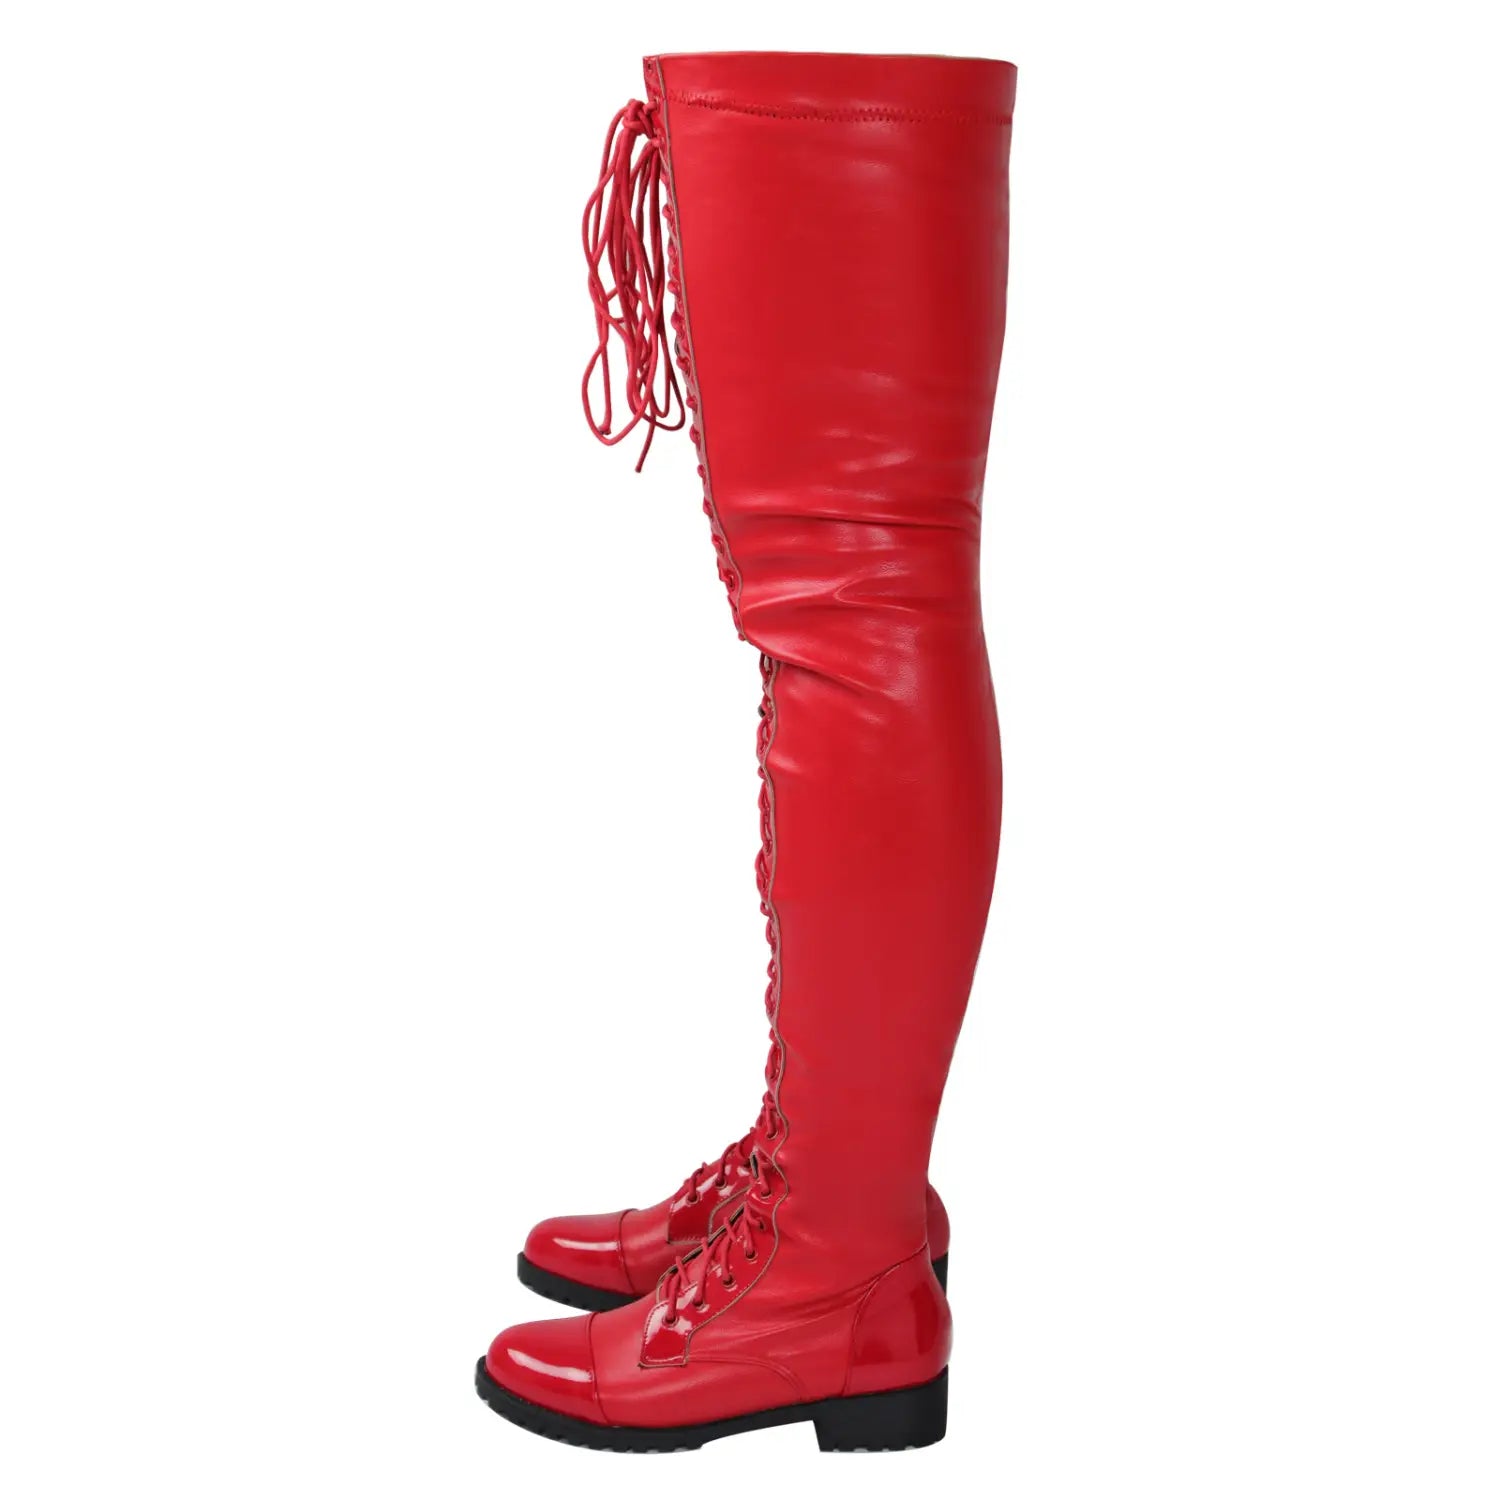 Lace Up Side Zipper Low Heel Full Length Thigh Boots